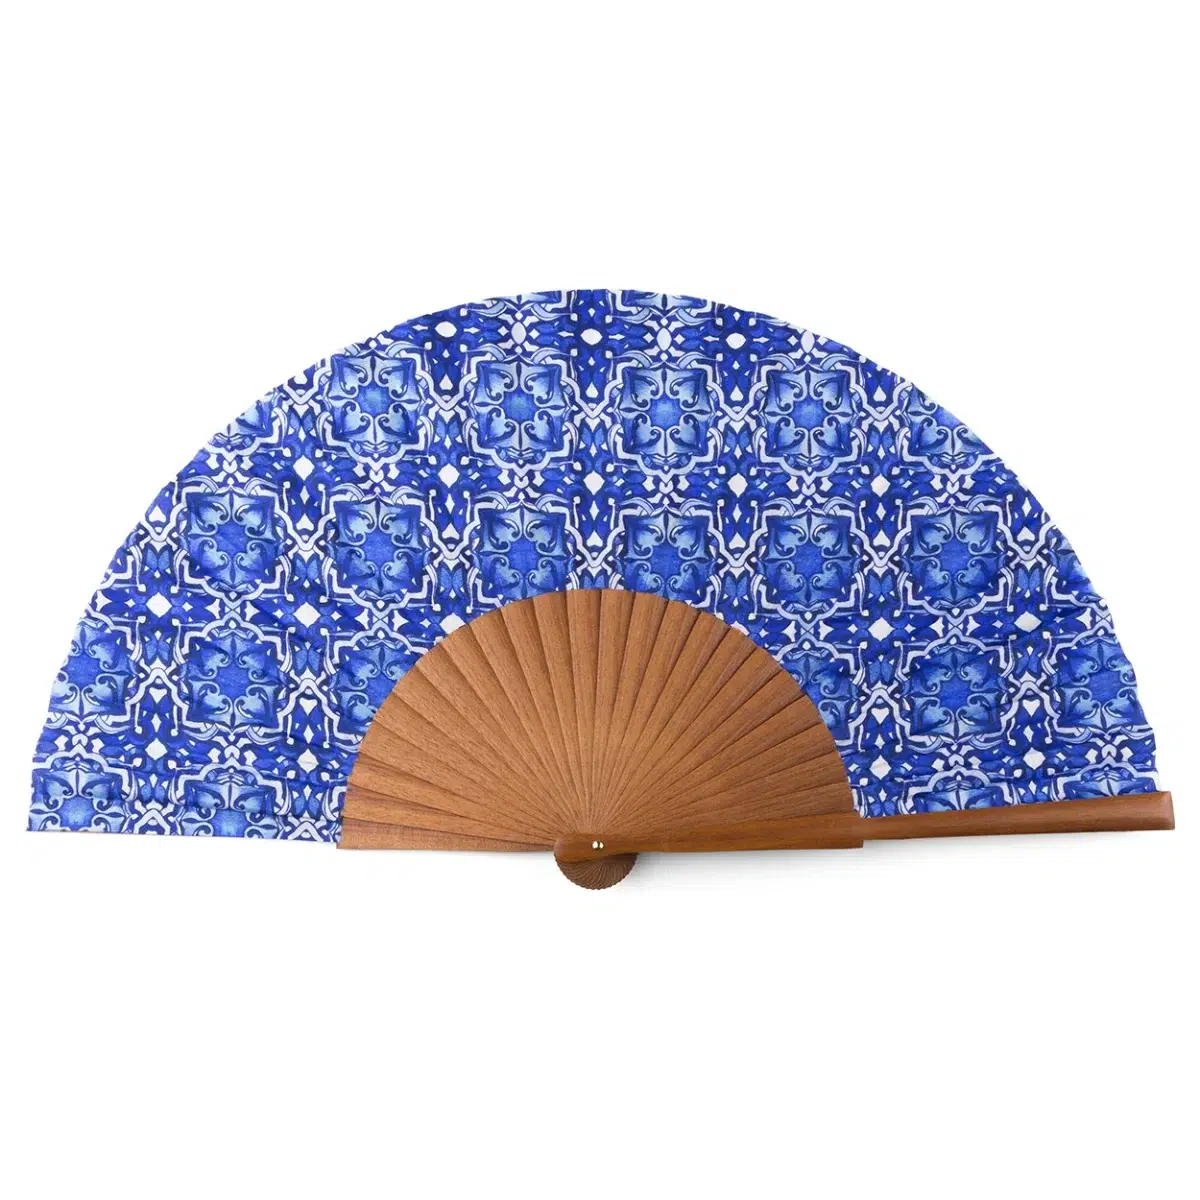 Blue and white silk fan with natural wood ribs.